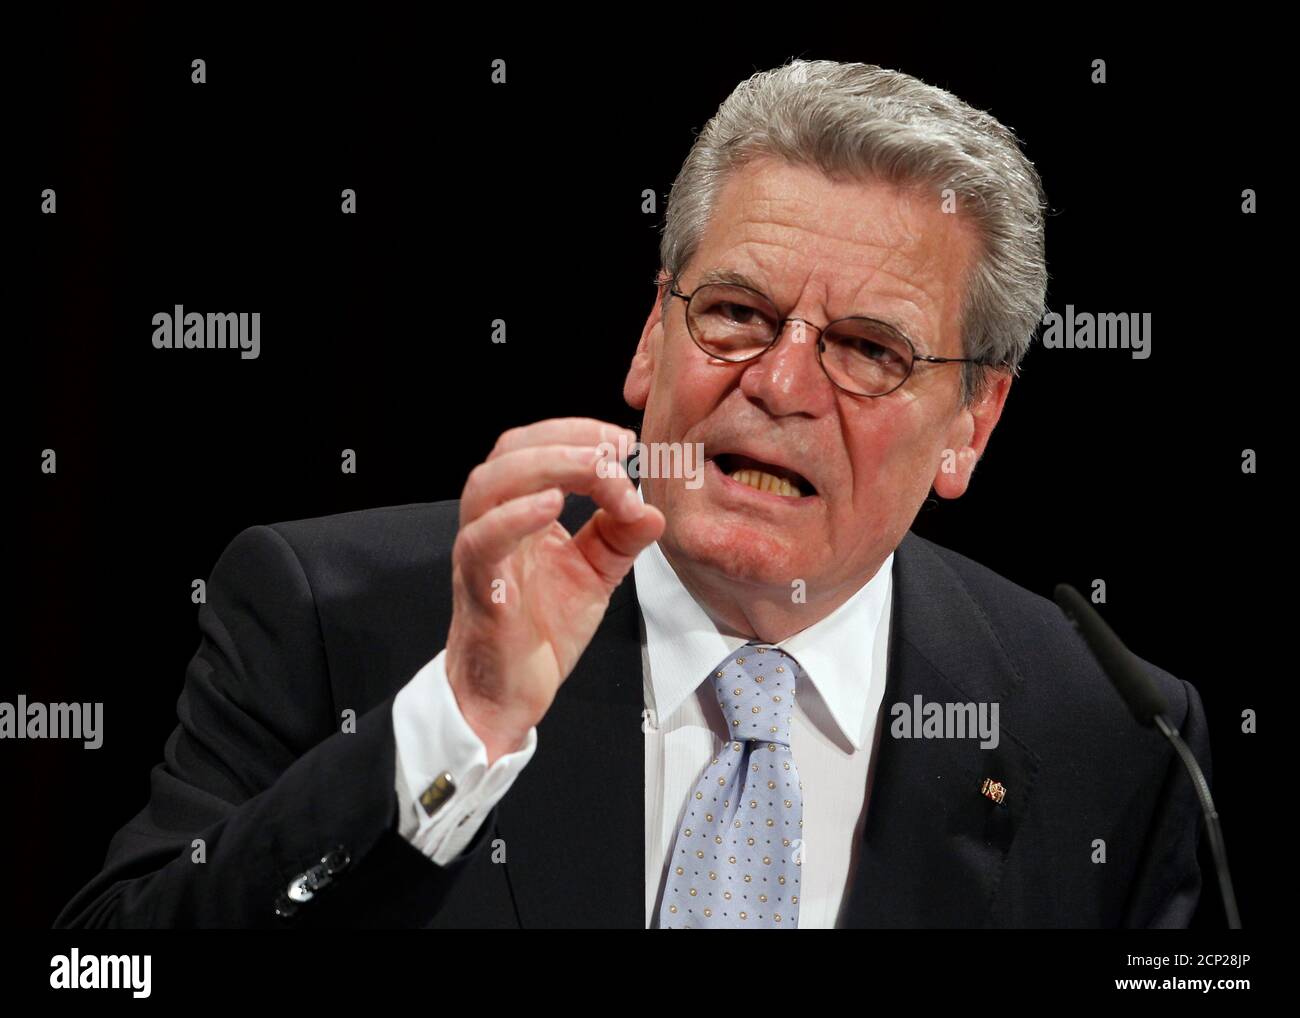 German presidential candidate Joachim Gauck delivers a speech in the Deutsches Theater (German Theatre) in Berlin, June 22, 2010. The vote for the largely ceremonial post is shaping up as a big test for Chancellor Angela Merkel who has been dogged by falling popularity, policy spats in her centre-right coalition and accusations of weak leadership. A failure by Merkel to push through the conservative candidate Christian Wulff, the premier of the state of Lower Saxony, would be widely viewed as a major defeat for her. Joachim Gauck, a former Protestant pastor who played an important role in the  Stock Photo